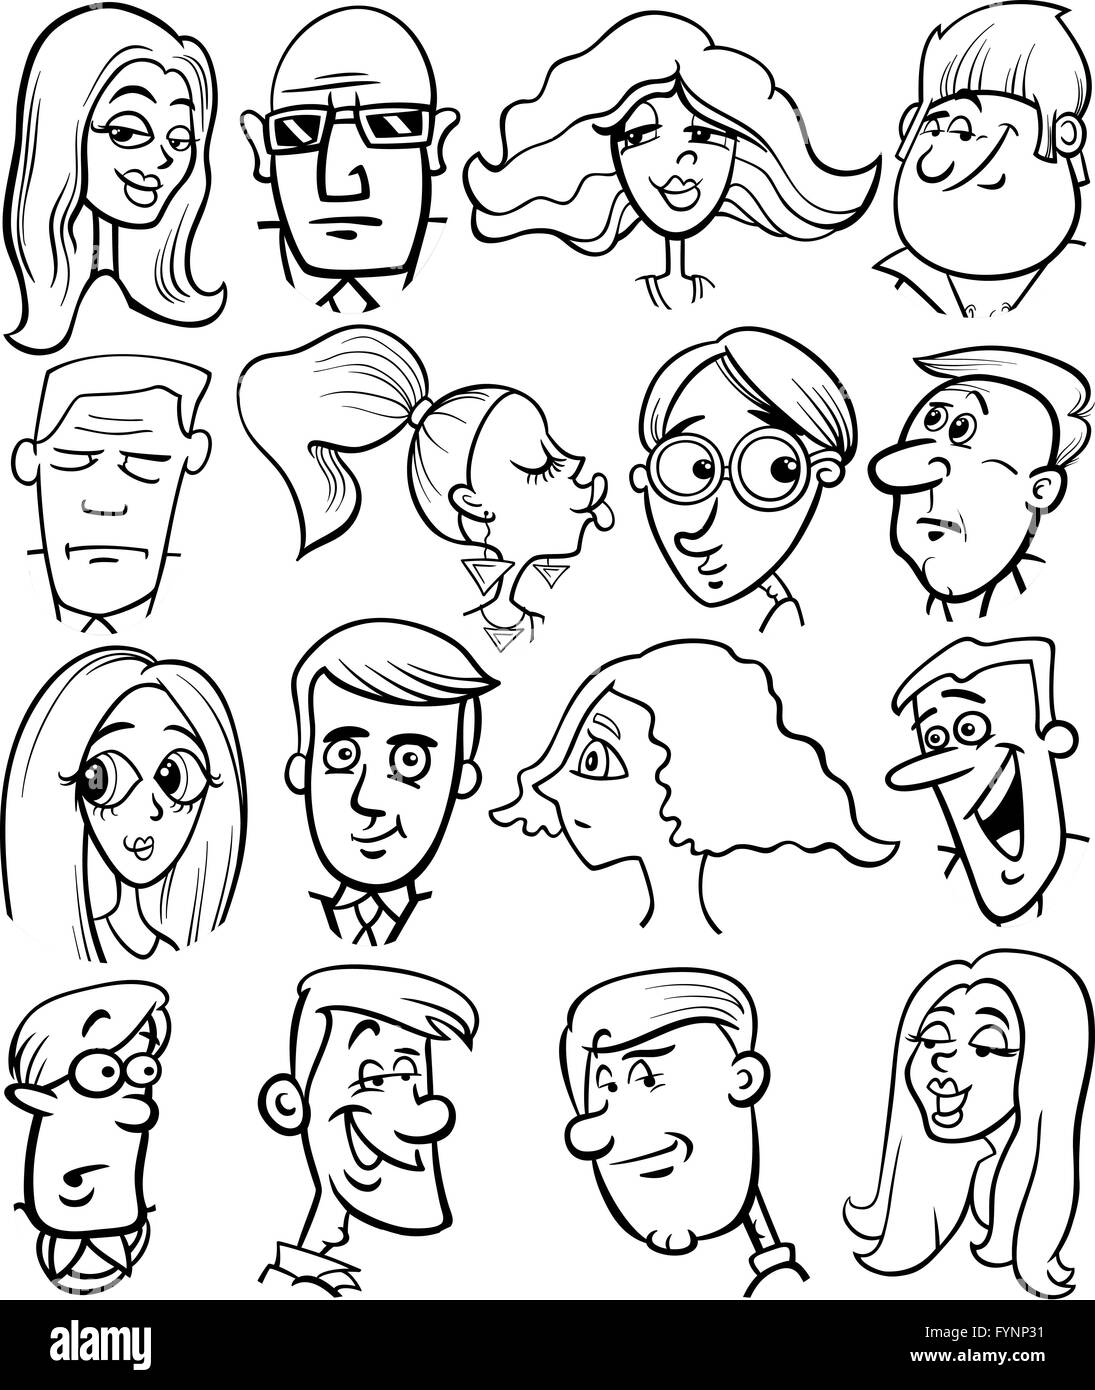 cartoon people characters faces Stock Photo - Alamy